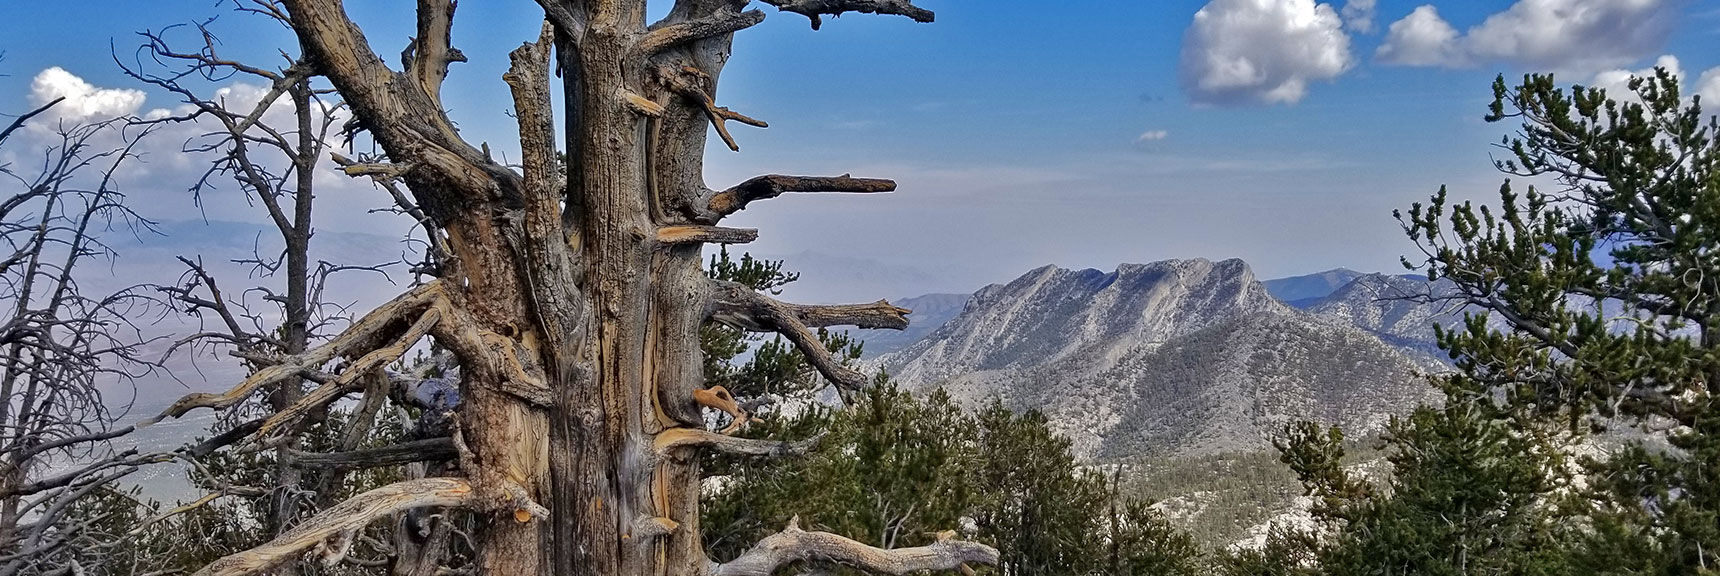 McFarland Peak from Bonanza Peak Summit (Gass Peak Faintly Visible to Left Between Branches) | Bonanza Peak from Lee Canyon via the Lower Bristlecone Pine Trail and Bonanza Trail | Spring Mountains, Nevada